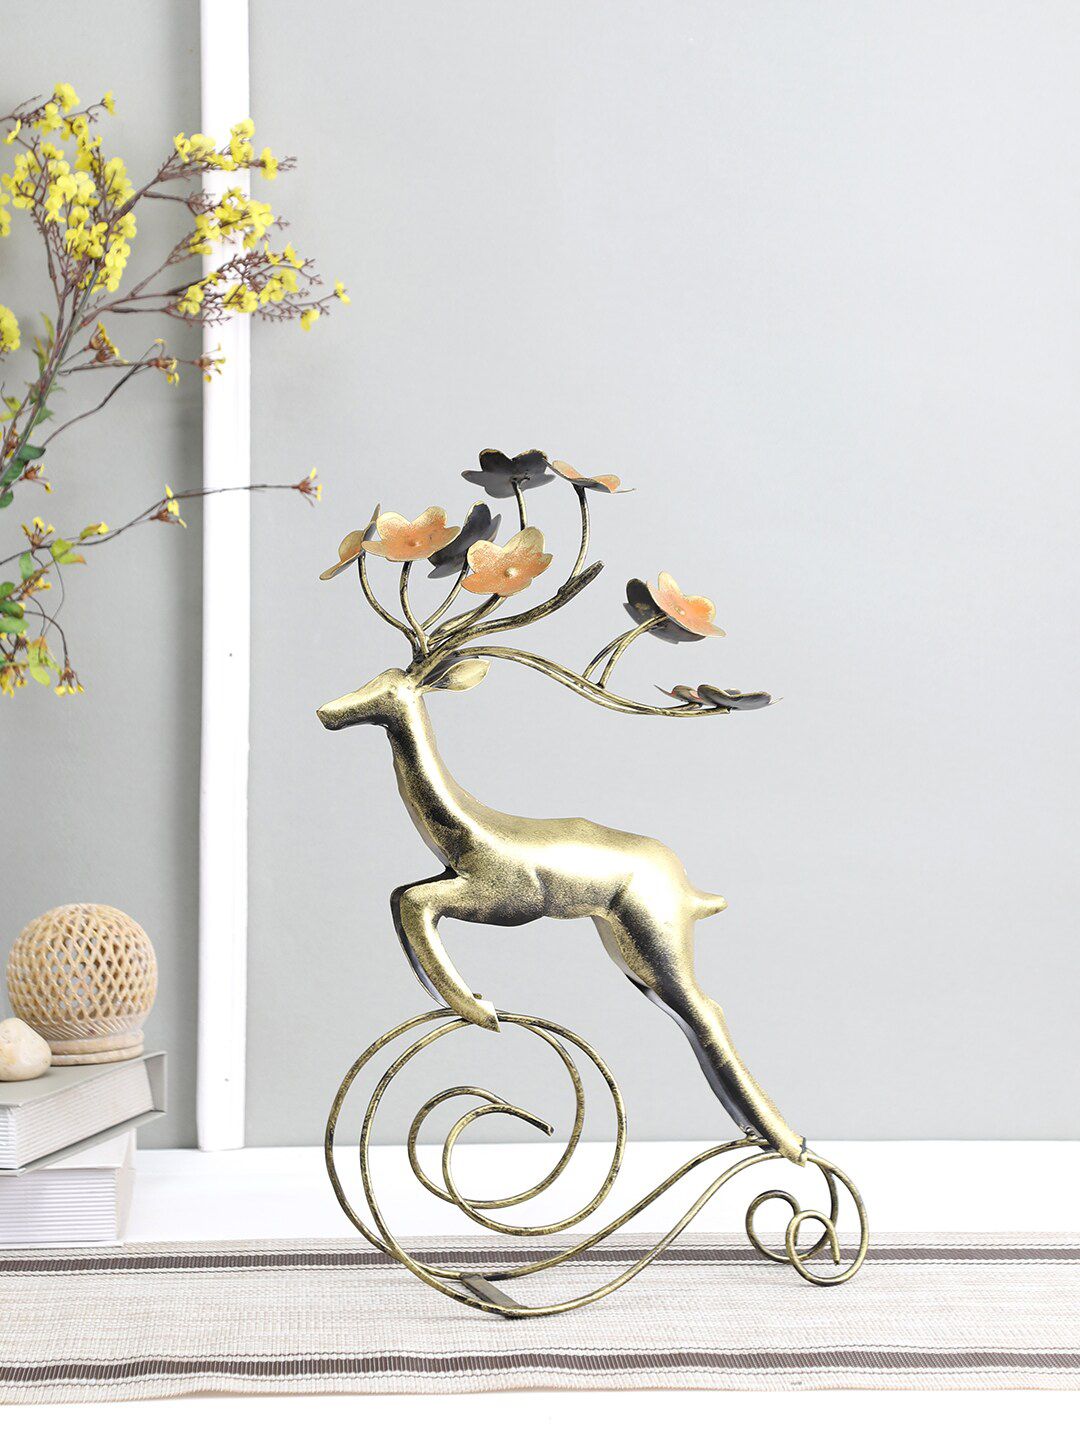 Aapno Rajasthan Gold-Toned Decorative Reindeer With Flower Showpieces Price in India